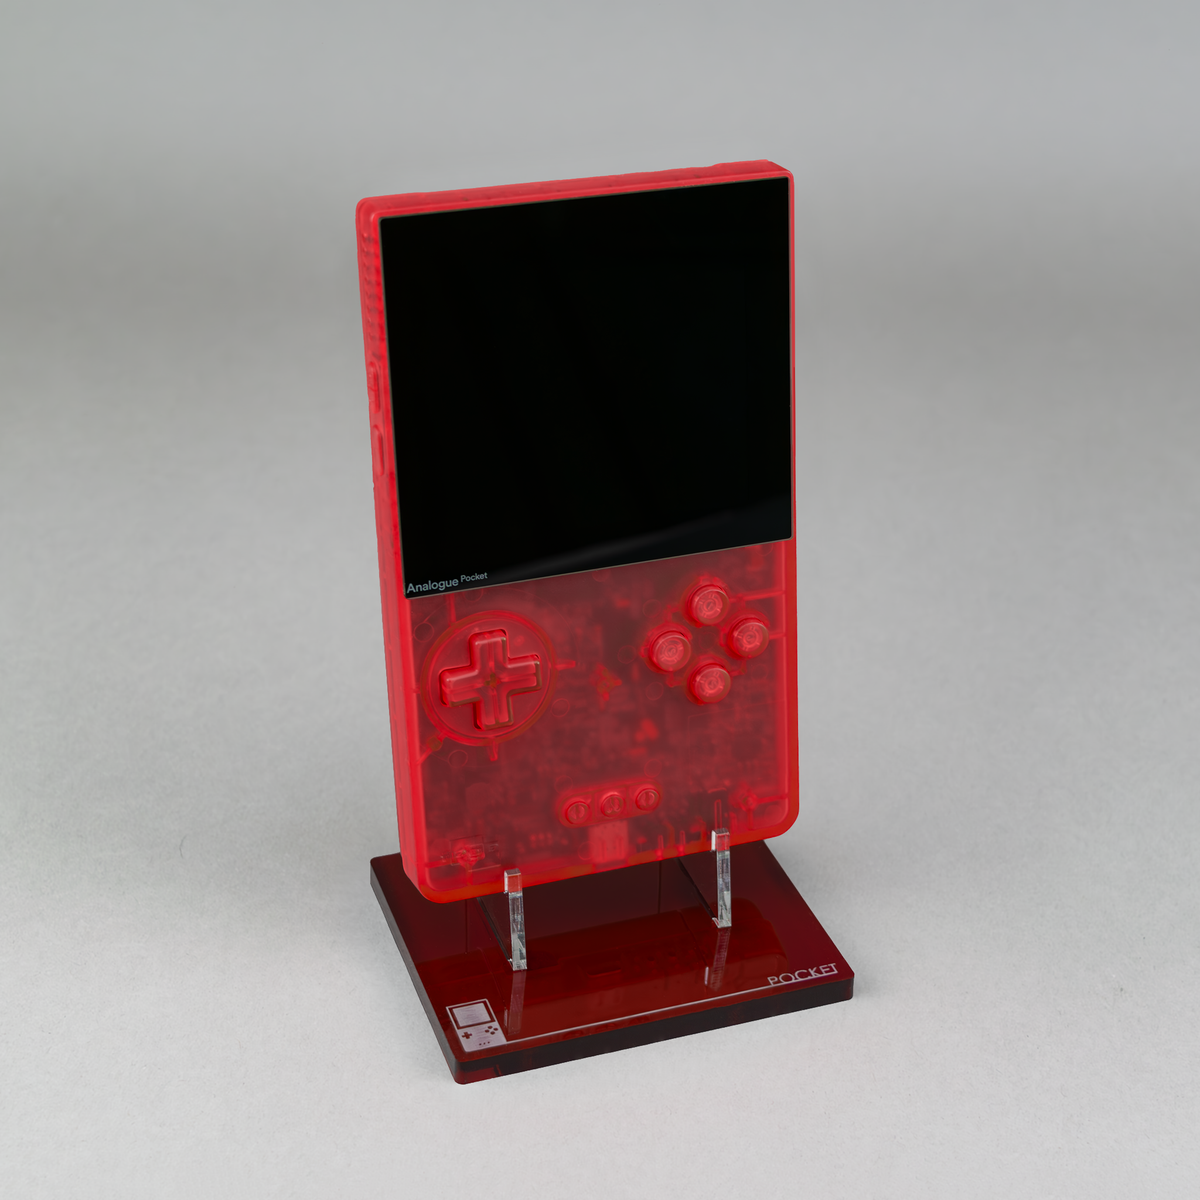 Analogue Pocket Display (TRANSPARENT RED) – Rose Colored